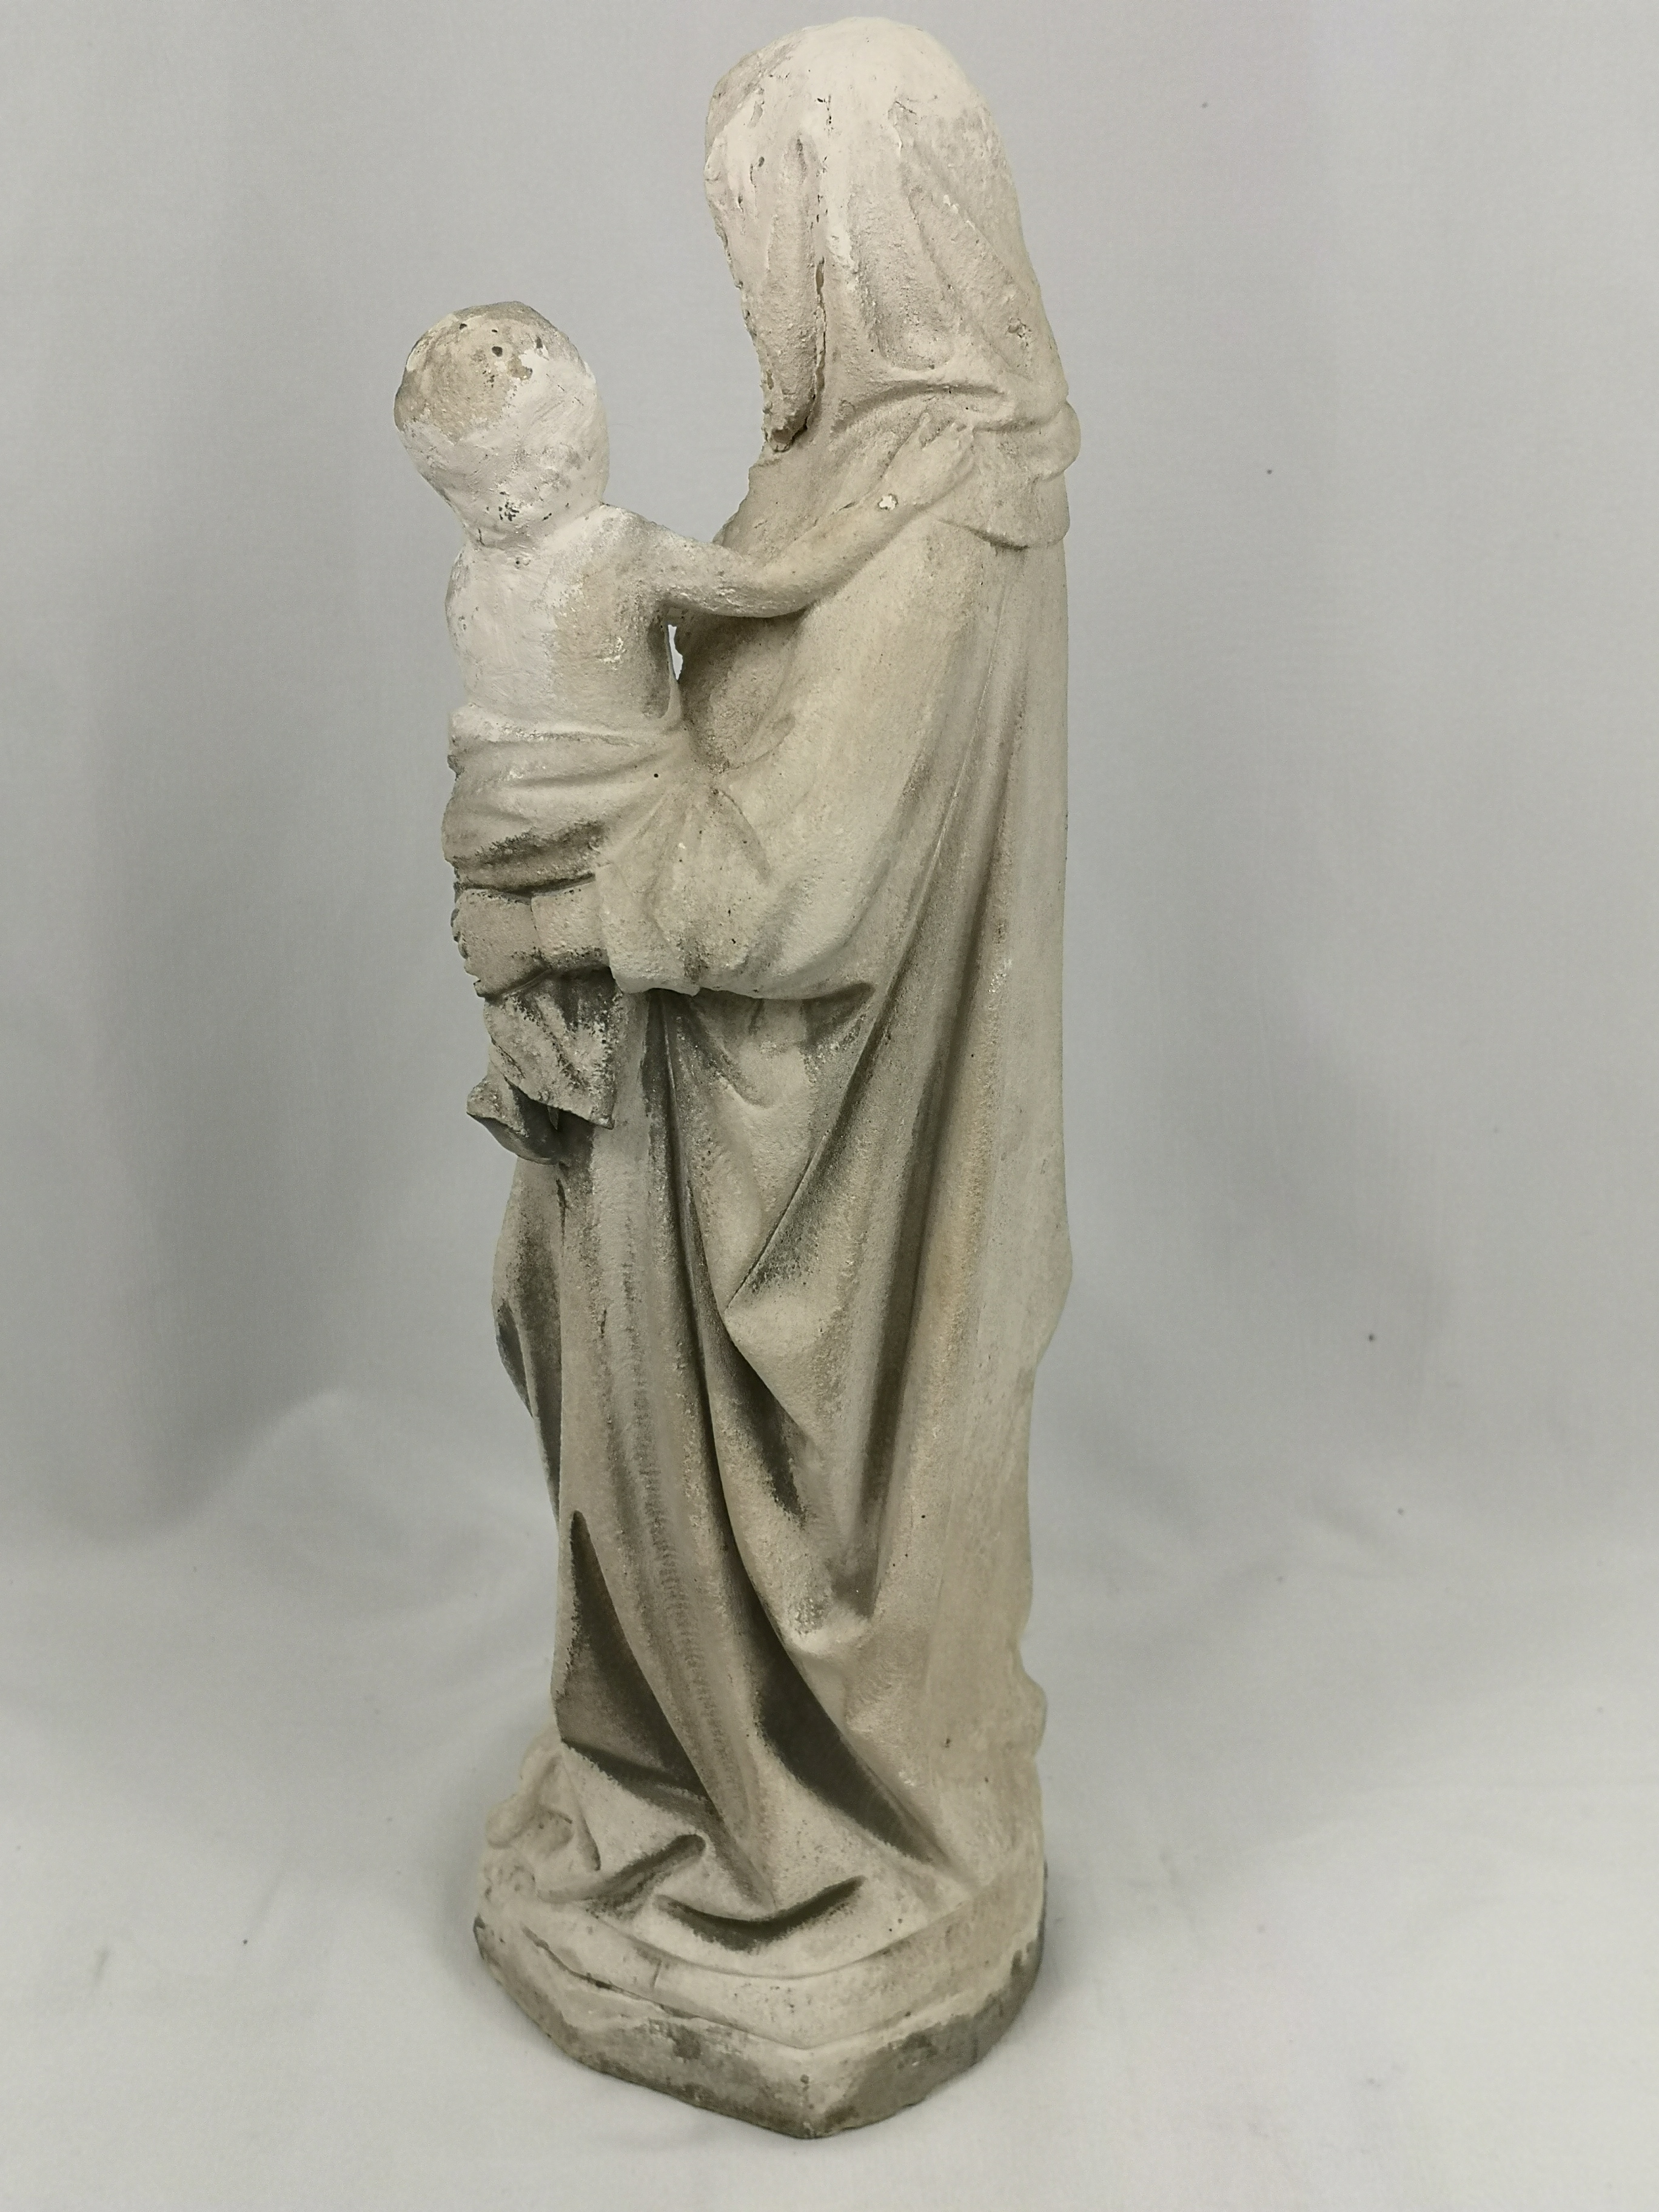 Stone carving of the Madonna and child - Image 7 of 8